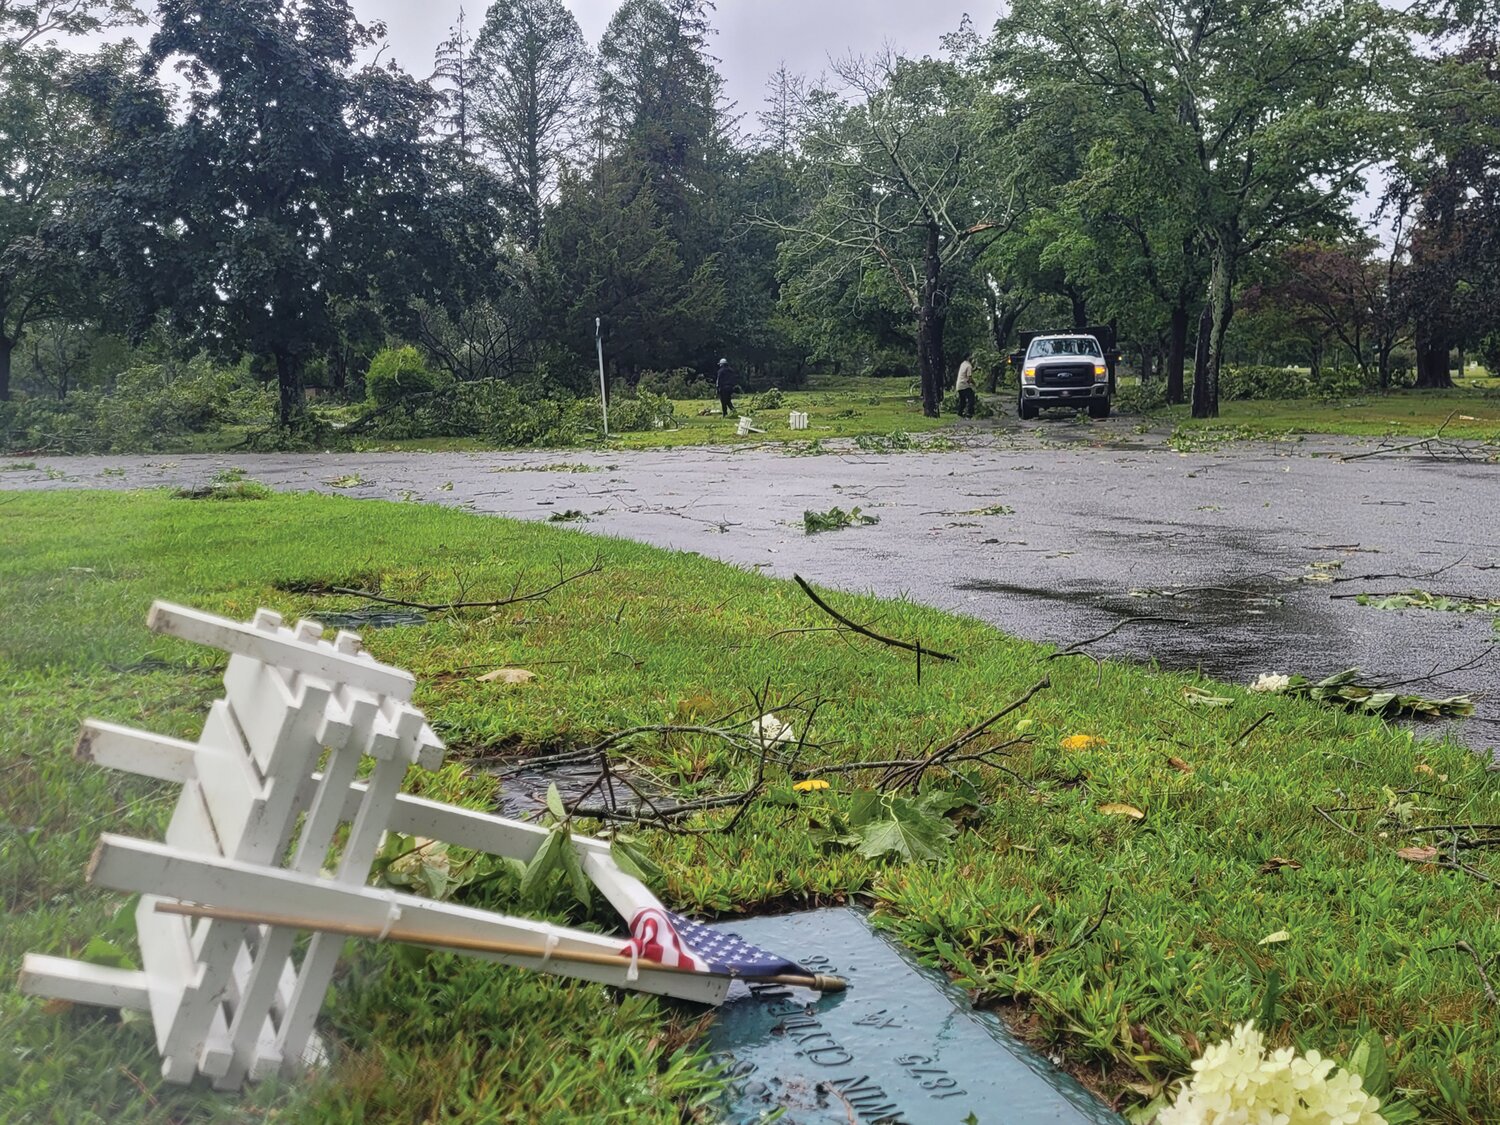 DIRECT HIT: Highland Memorial Park Cemetery in Johnston seems to have taken a direct hit by this morning's tornado. A path of destruction: fallen trees, scattered planters, graves unearthed and huge trees toppled.